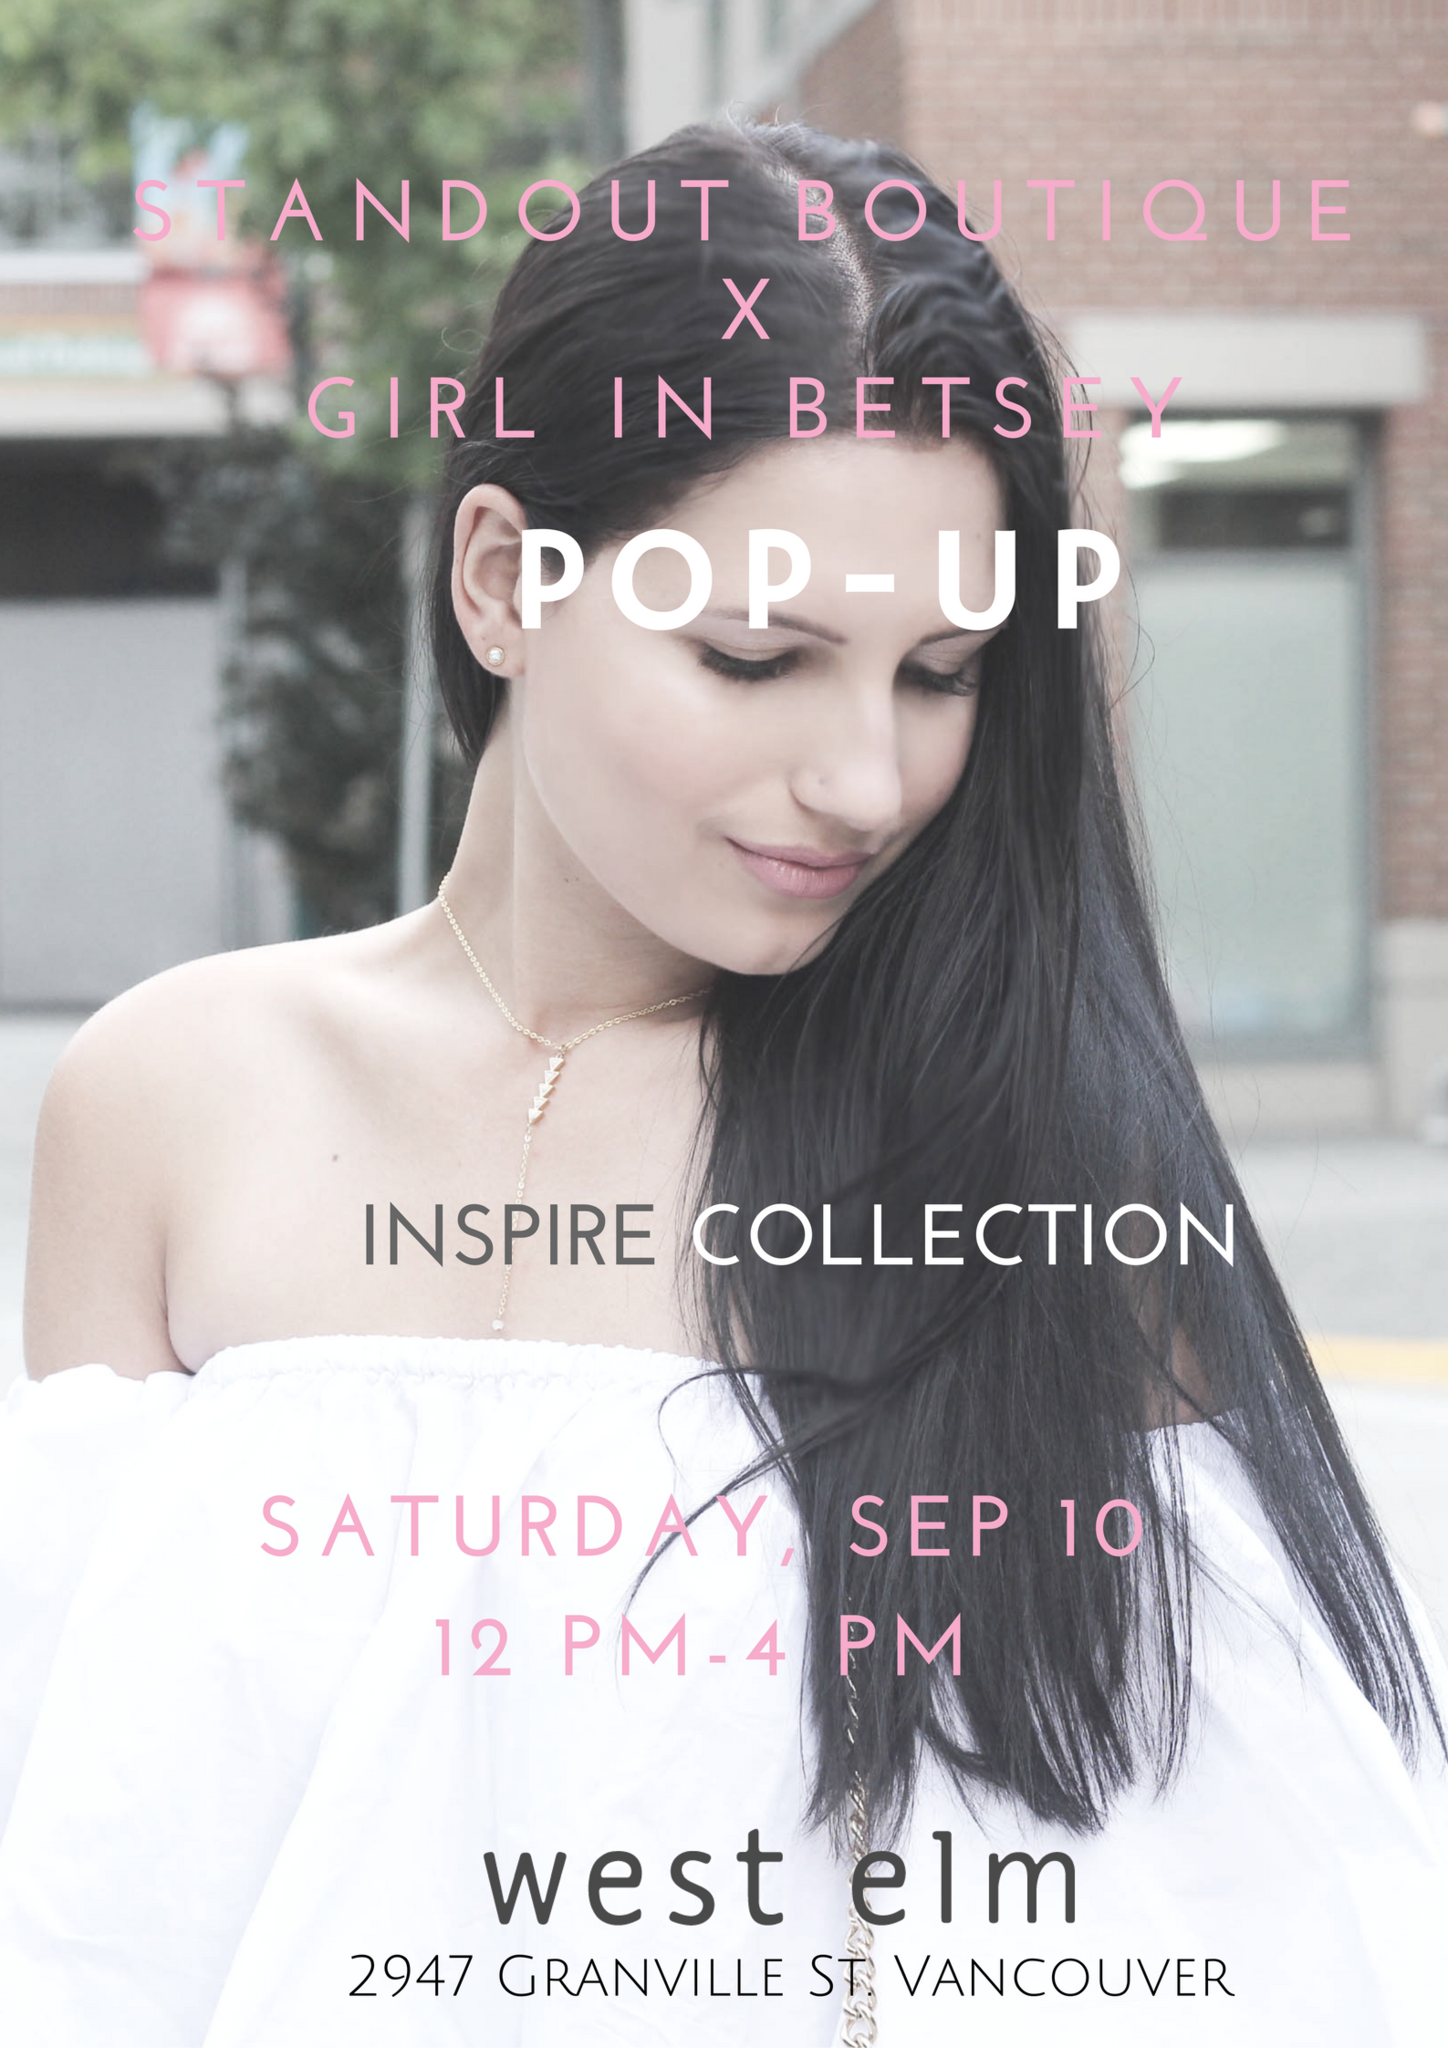 Standout Boutique x Girl in Betsey Pop-up Shop